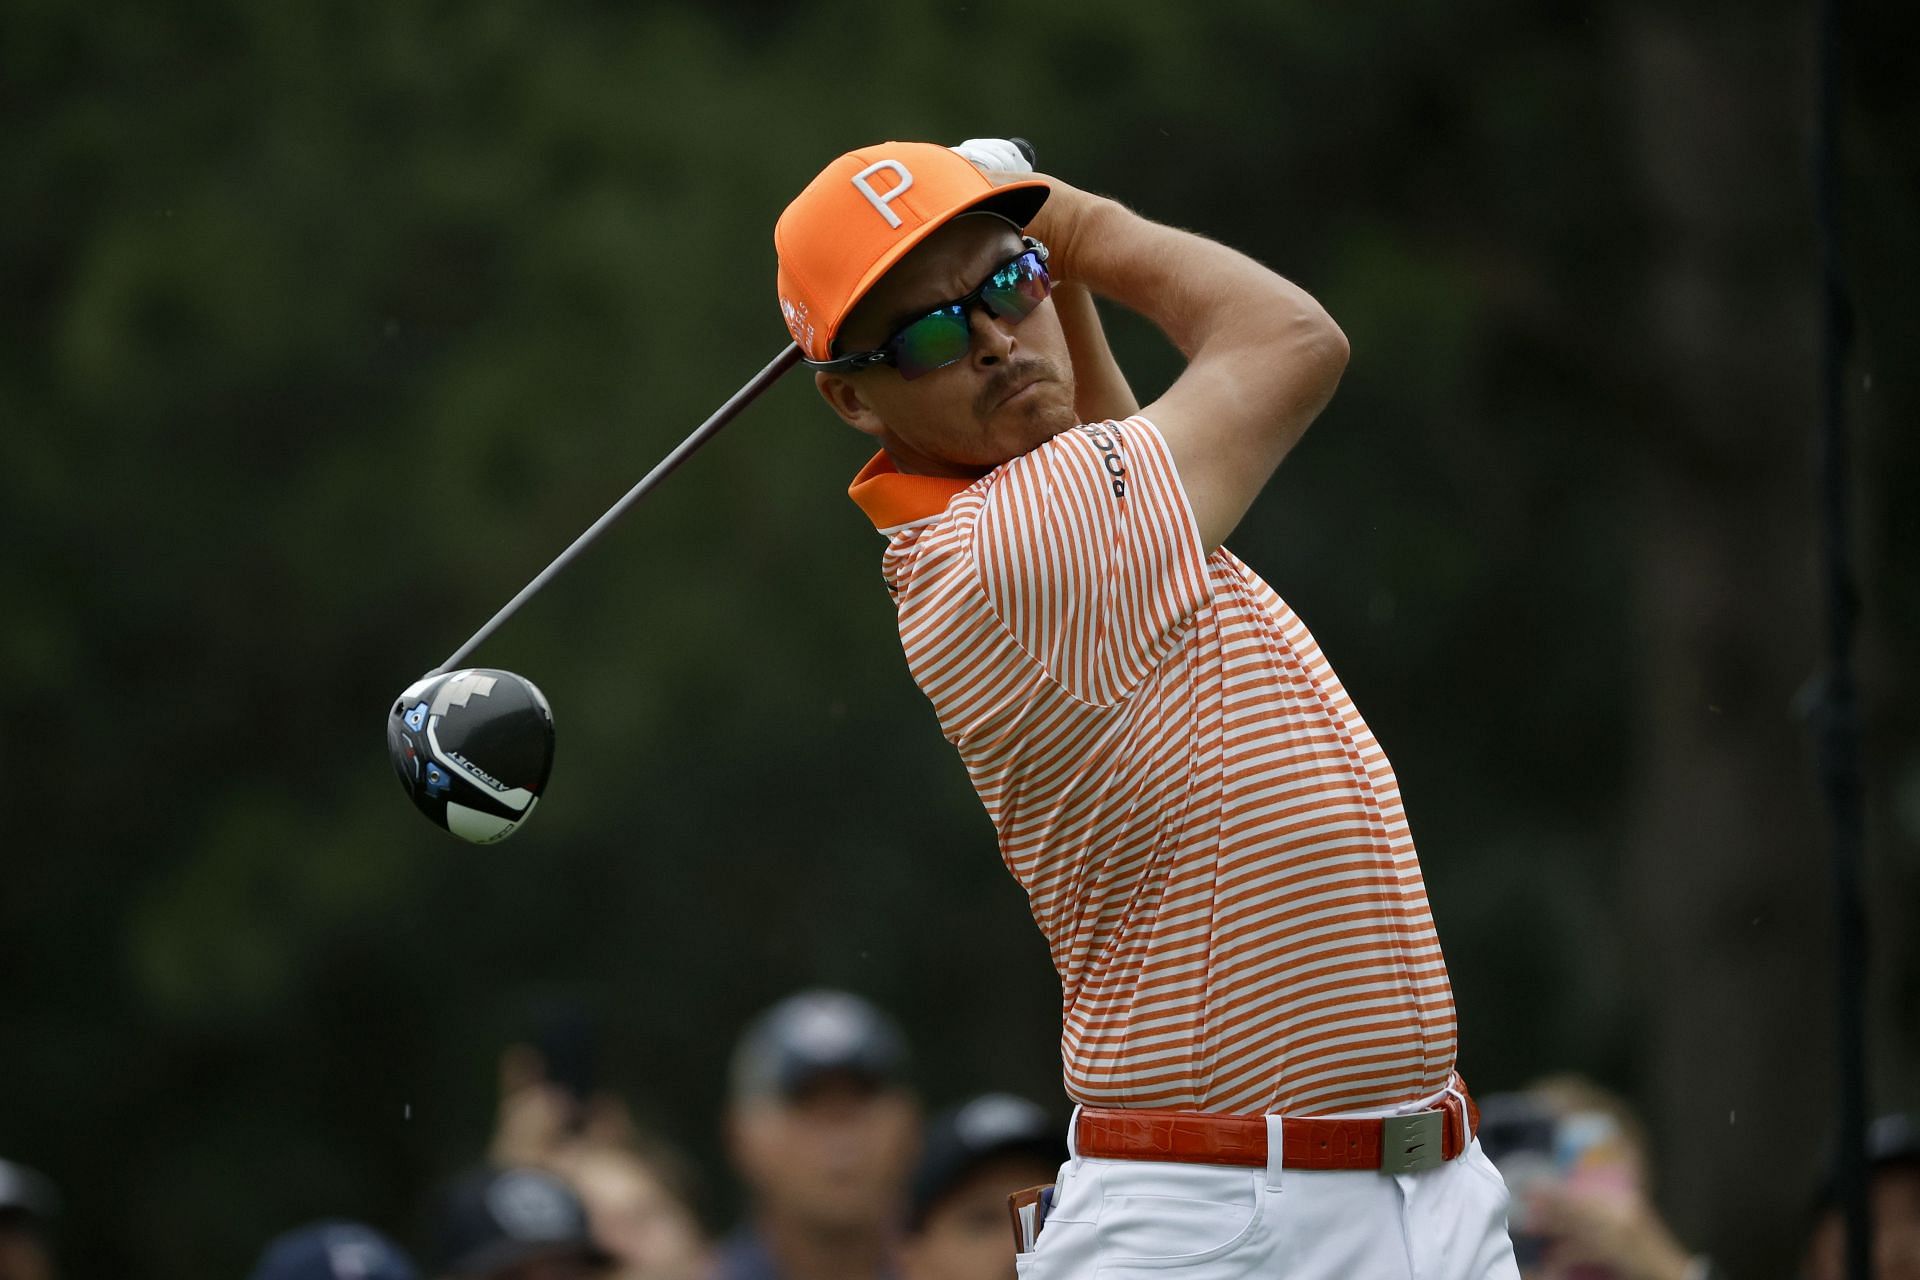 How many positions did Rickie Fowler jump in the Official World Golf